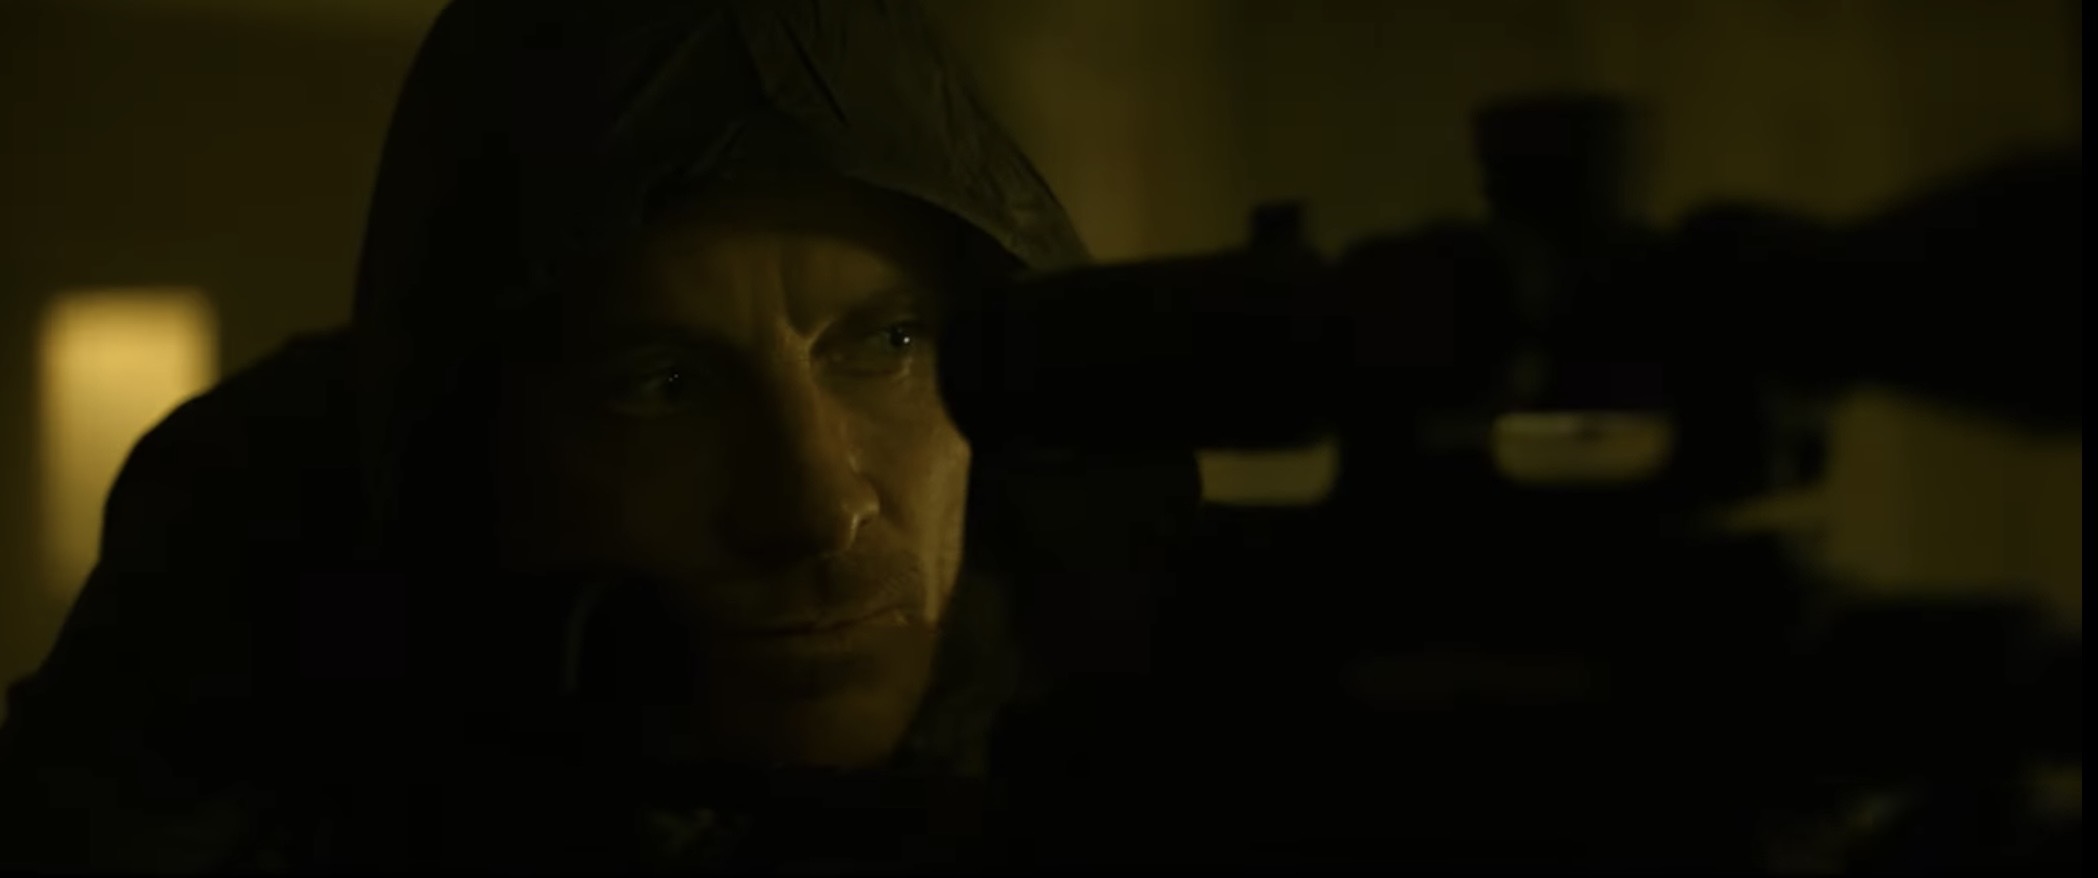 Check out the first trailer for David Fincher's 'The Killer' with Michael Fassbender